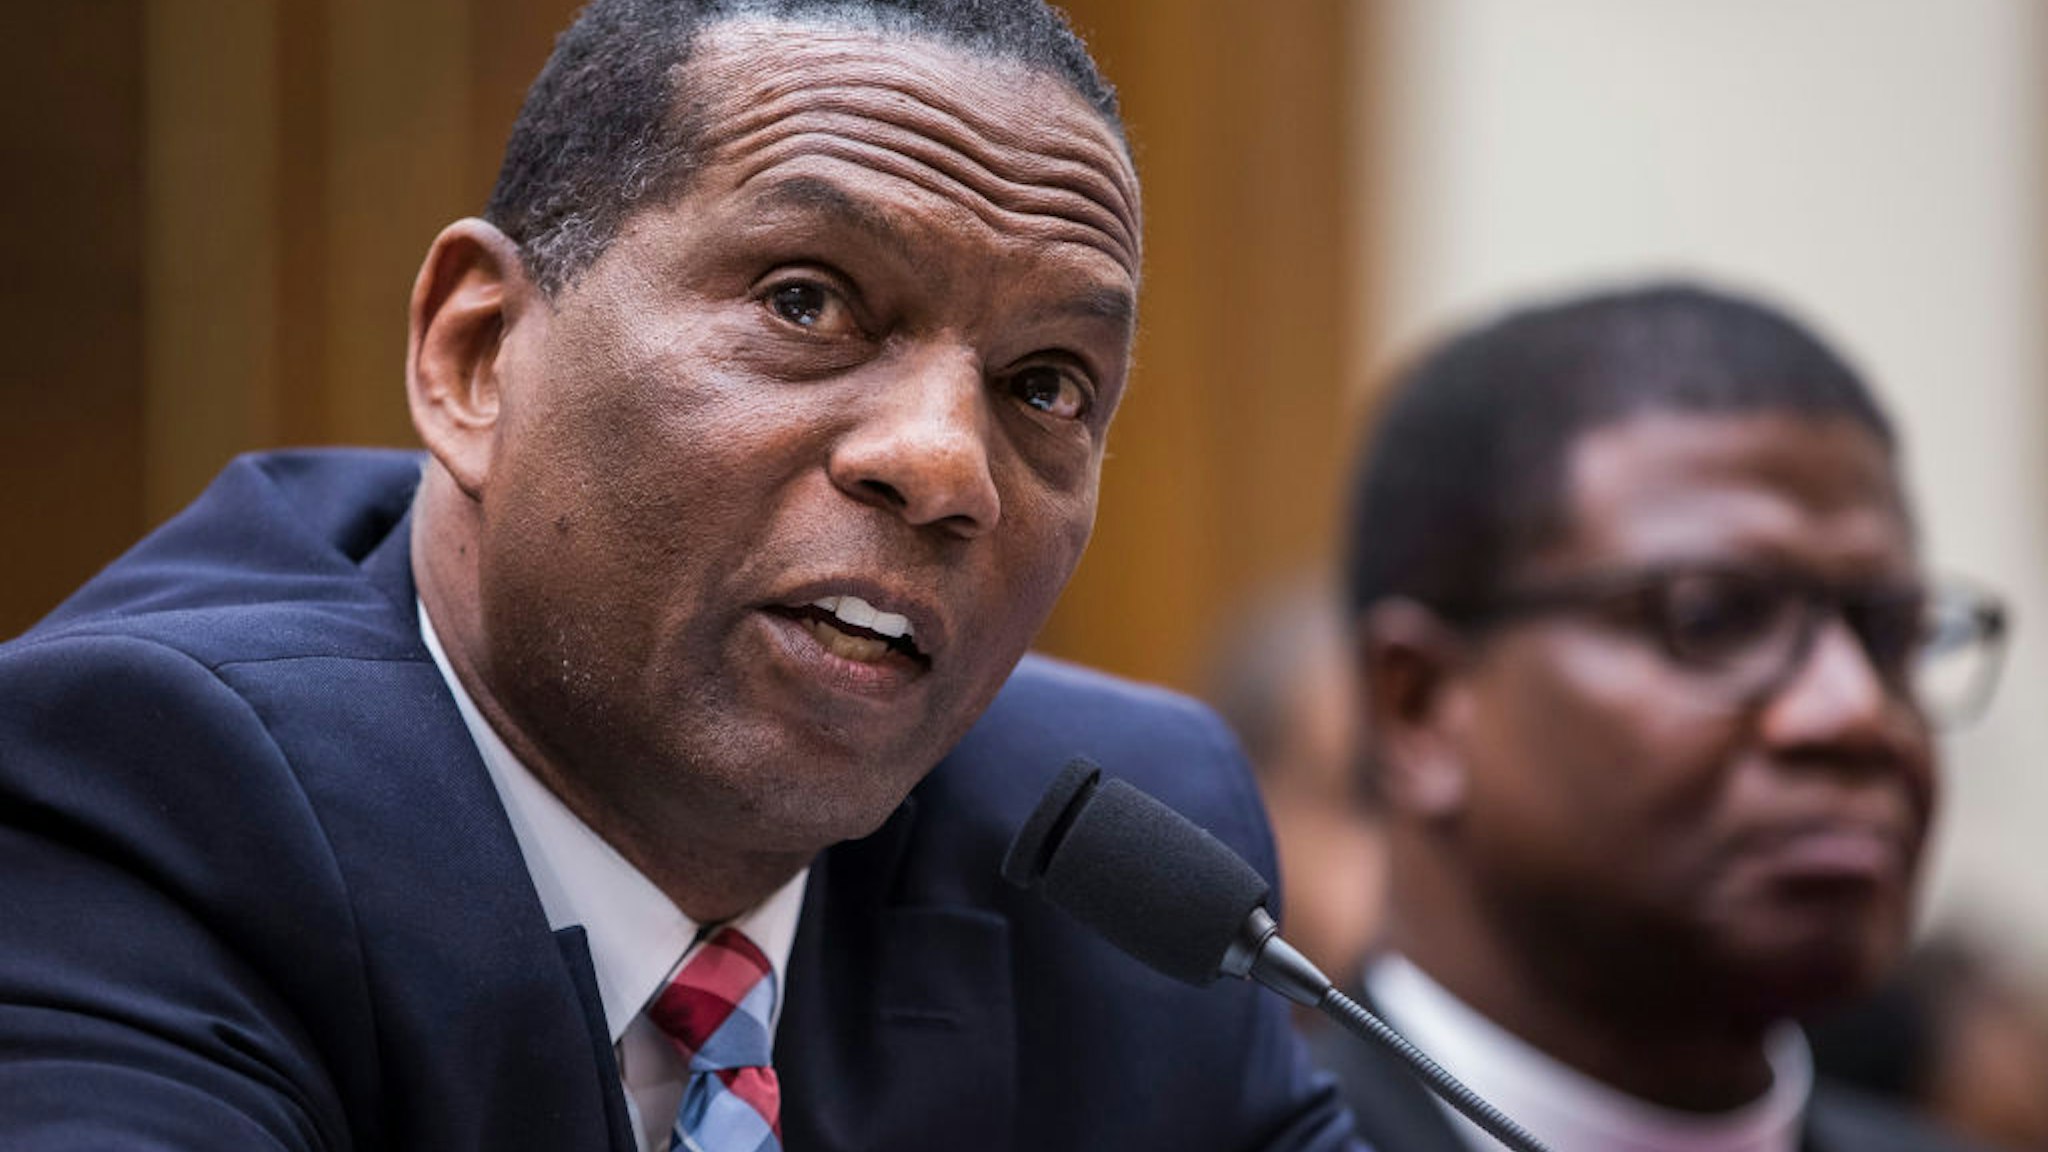 Former NFL player Burgess Owens testifies during a hearing on slavery reparations held by the House Judiciary Subcommittee on the Constitution, Civil Rights and Civil Liberties on June 19, 2019 in Washington, DC.